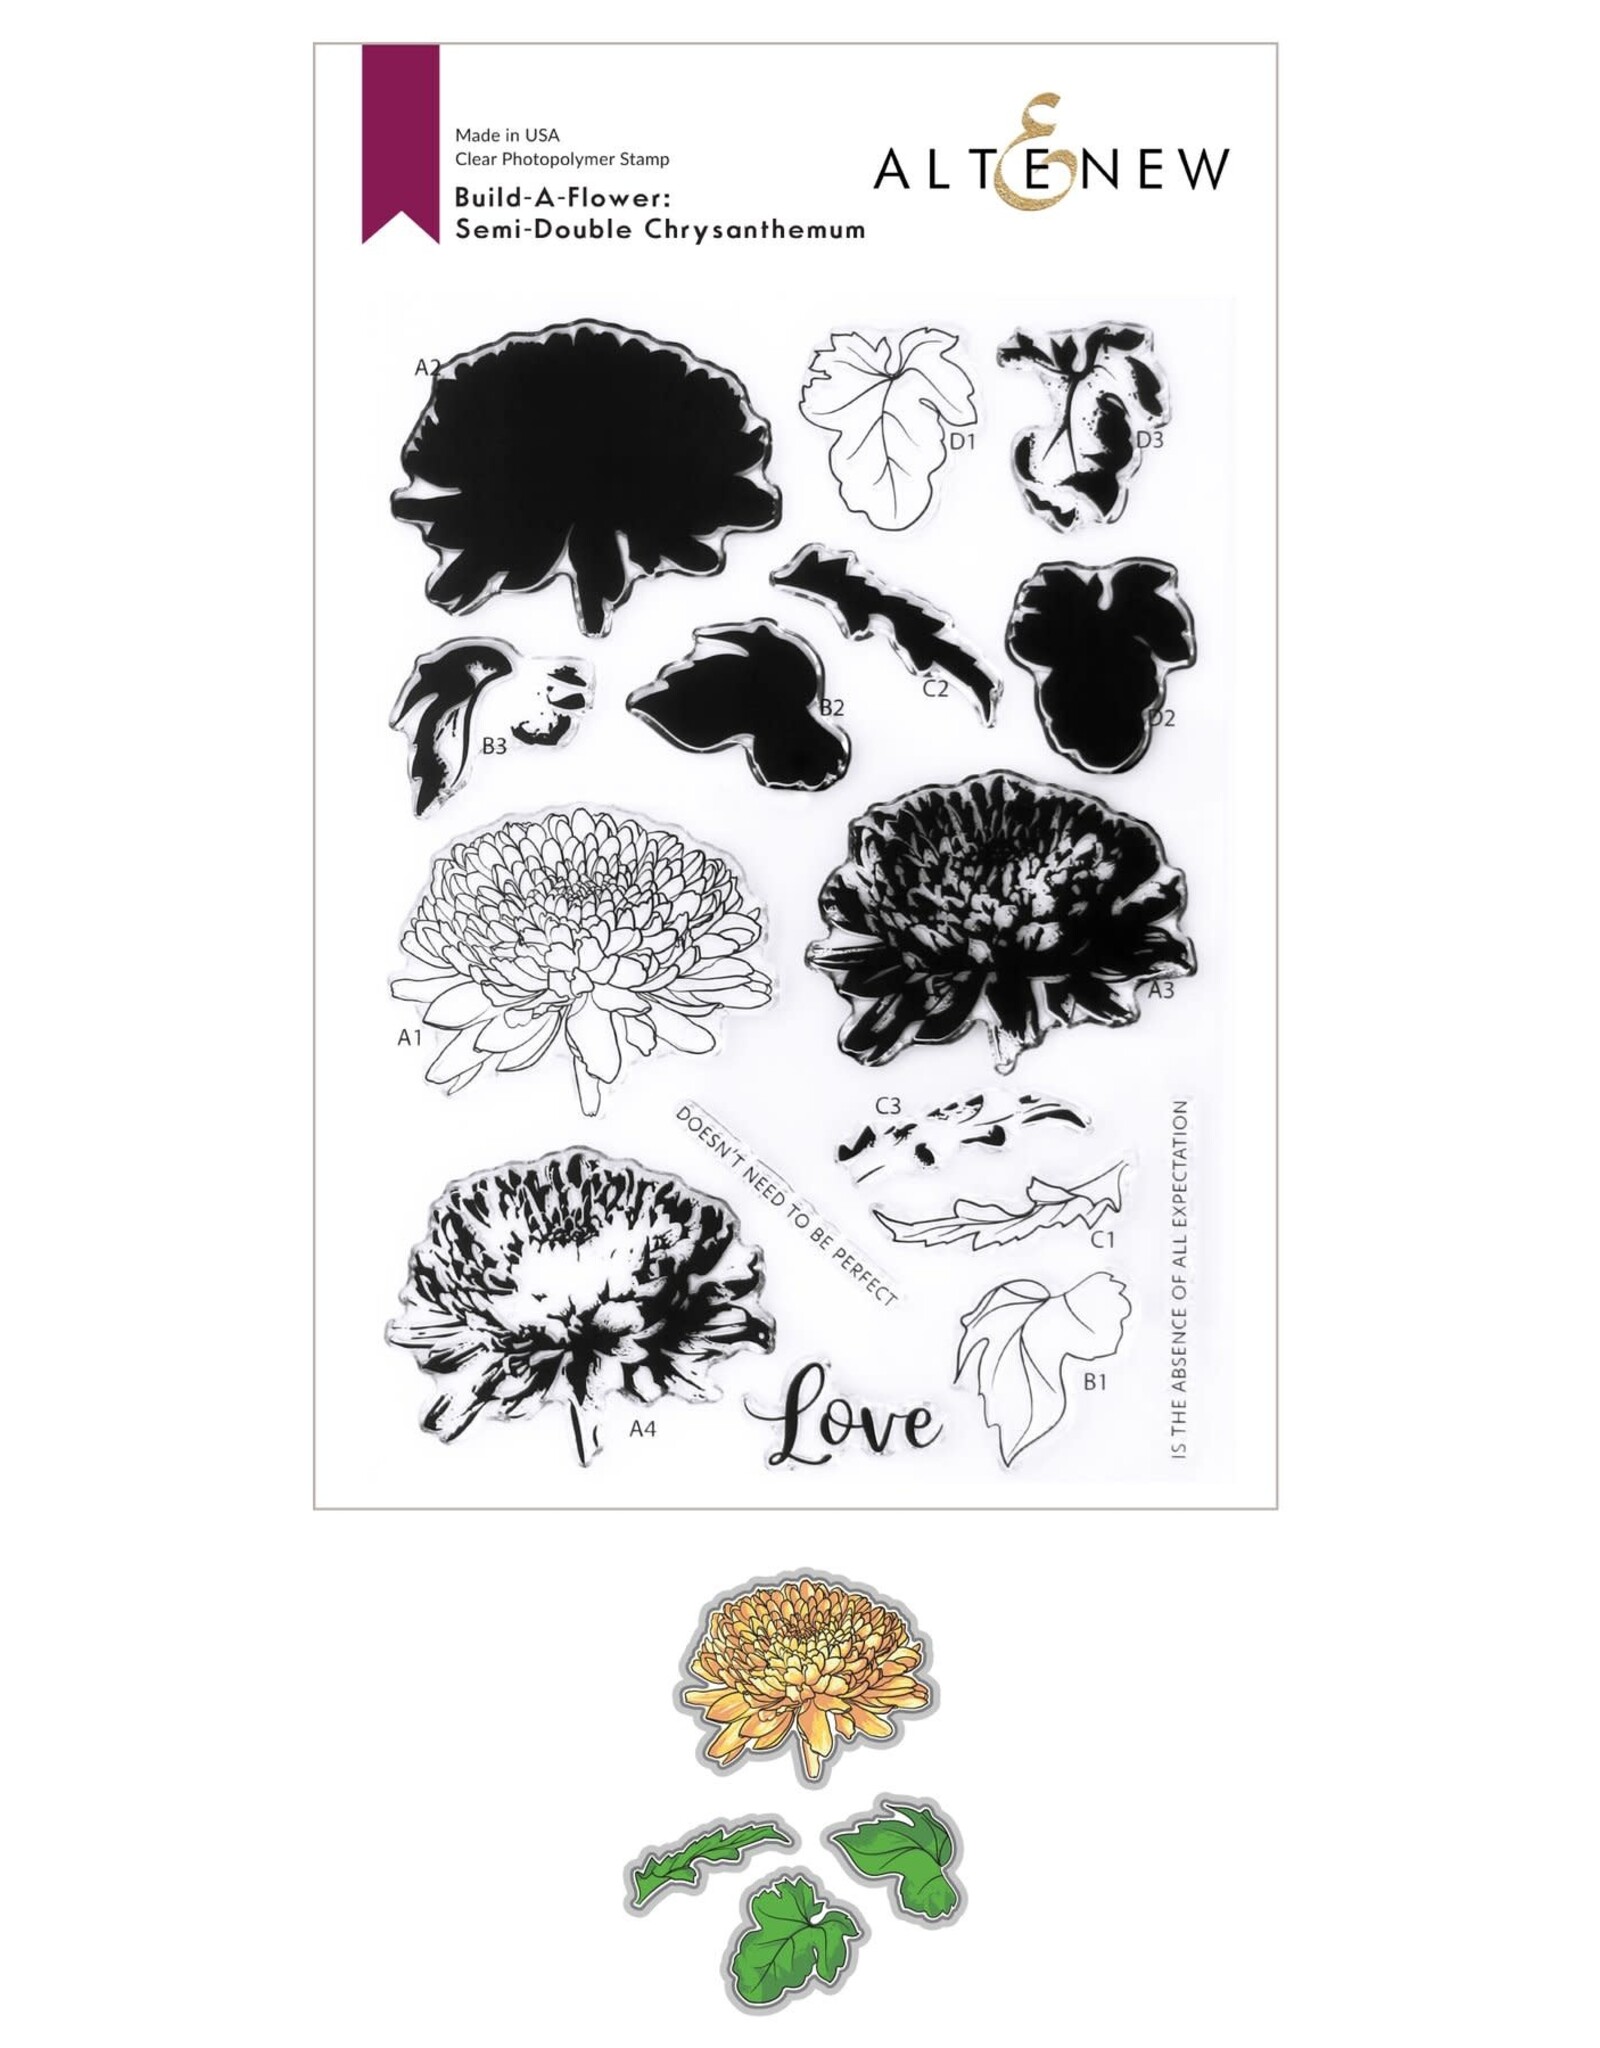 ALTENEW Build-A-Flower: Semi-Double Chrysanthemum Layering Stamp and Die Set